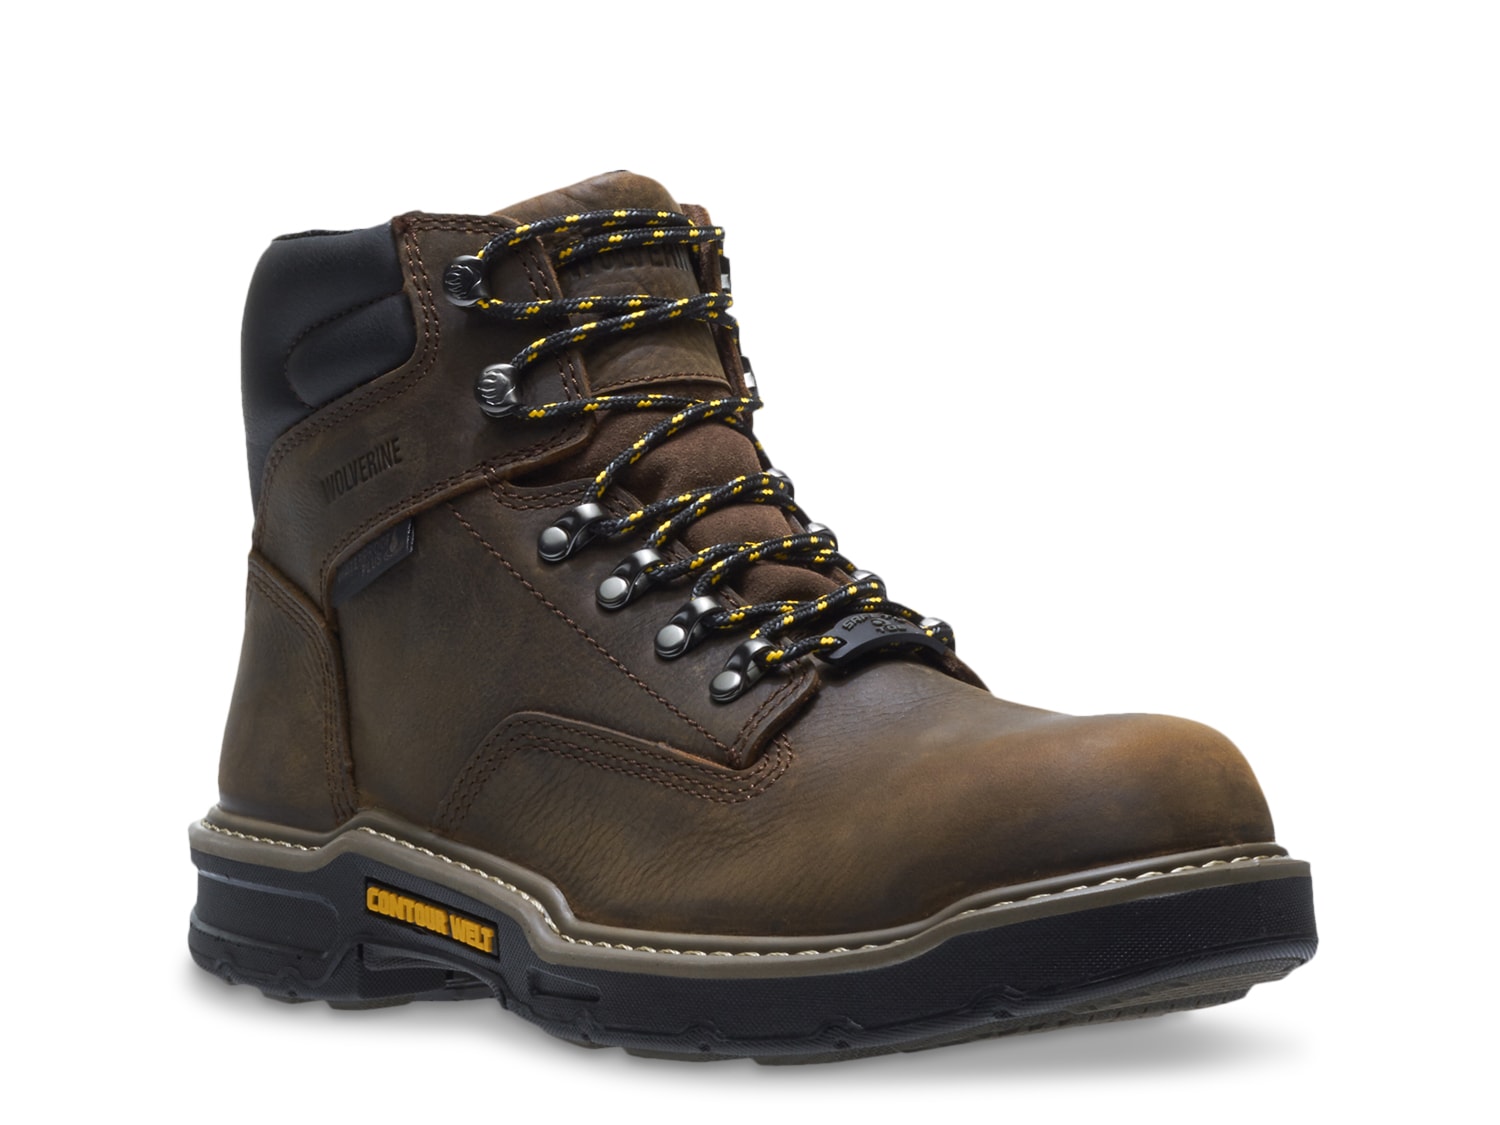 Wolverine Bandit CarbonMAX Toe Work Boot - Free Shipping | DSW